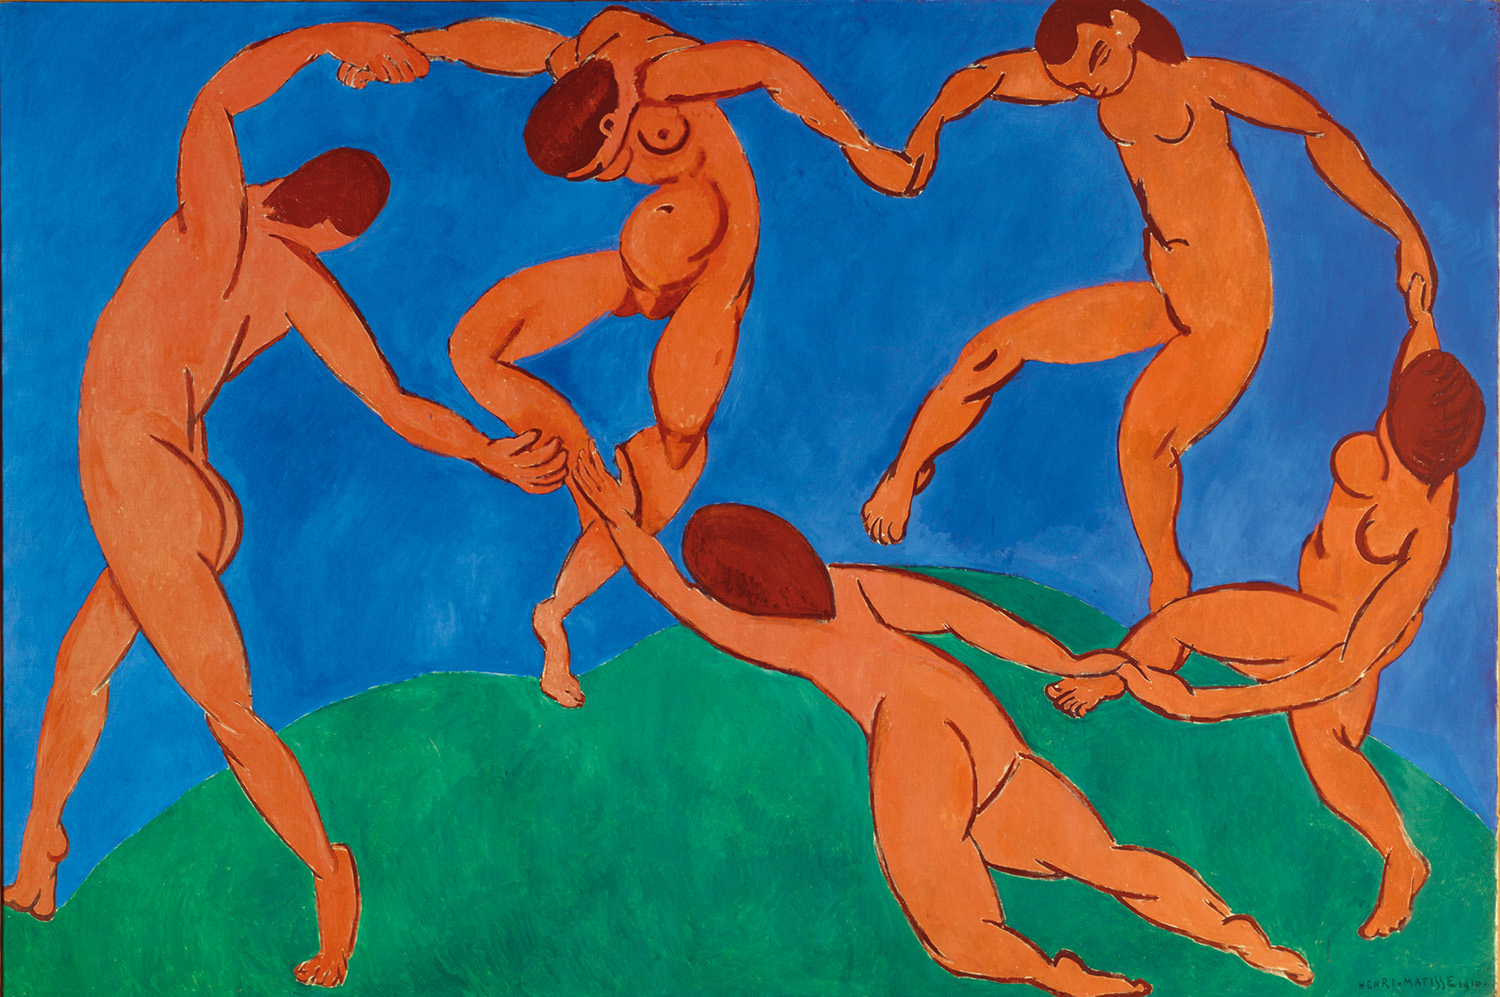 Face-to-face with Matisse’s “Backs”